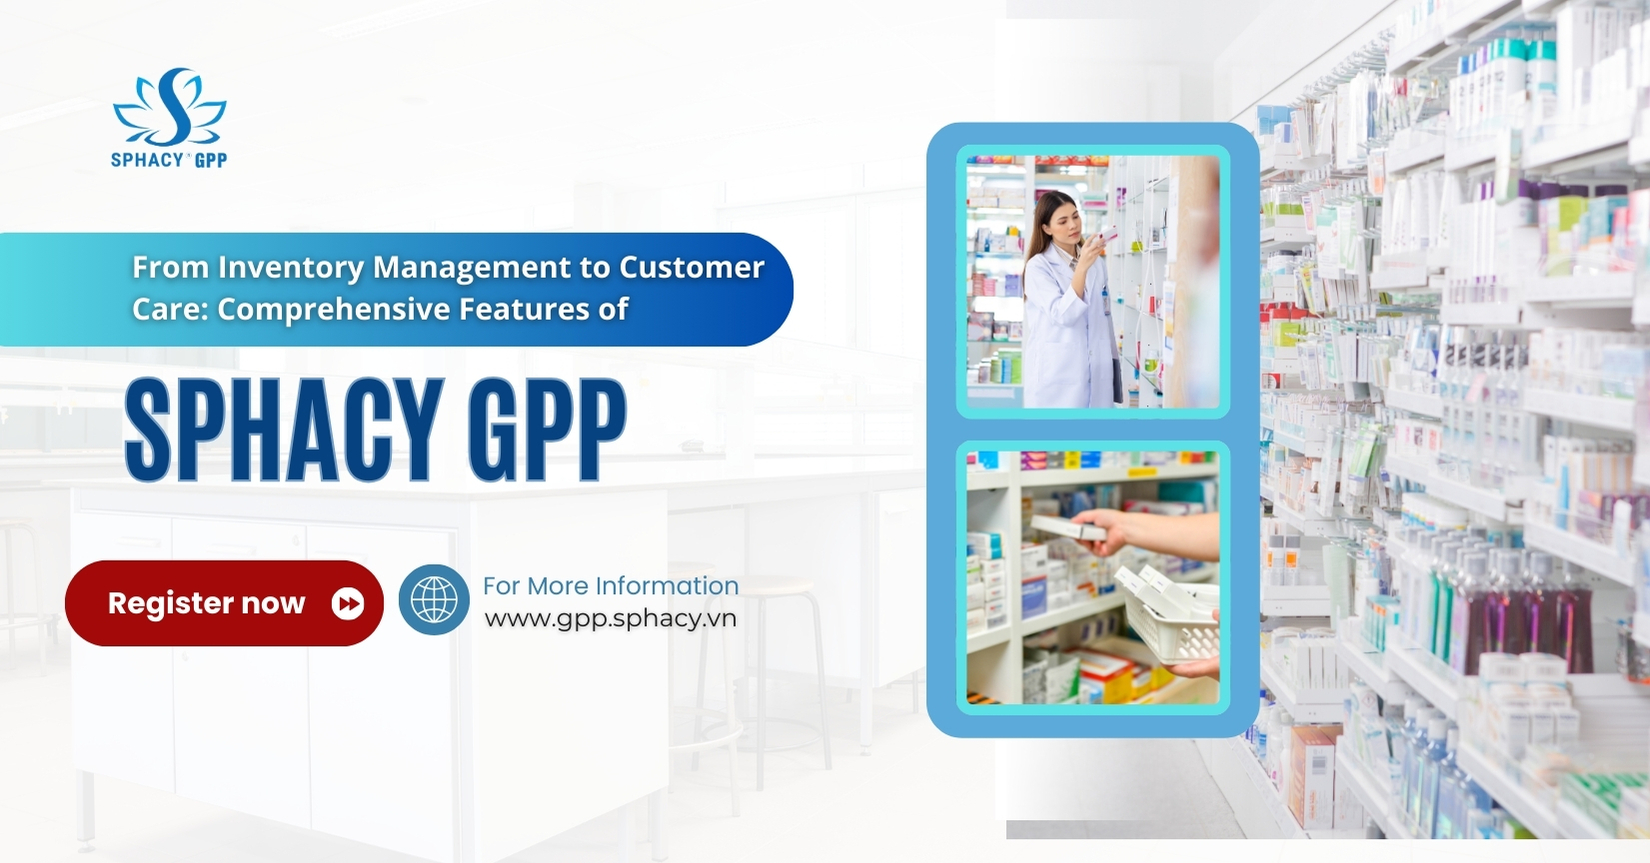 From Inventory Management to Customer Care: Comprehensive Features of SPHACY GPP